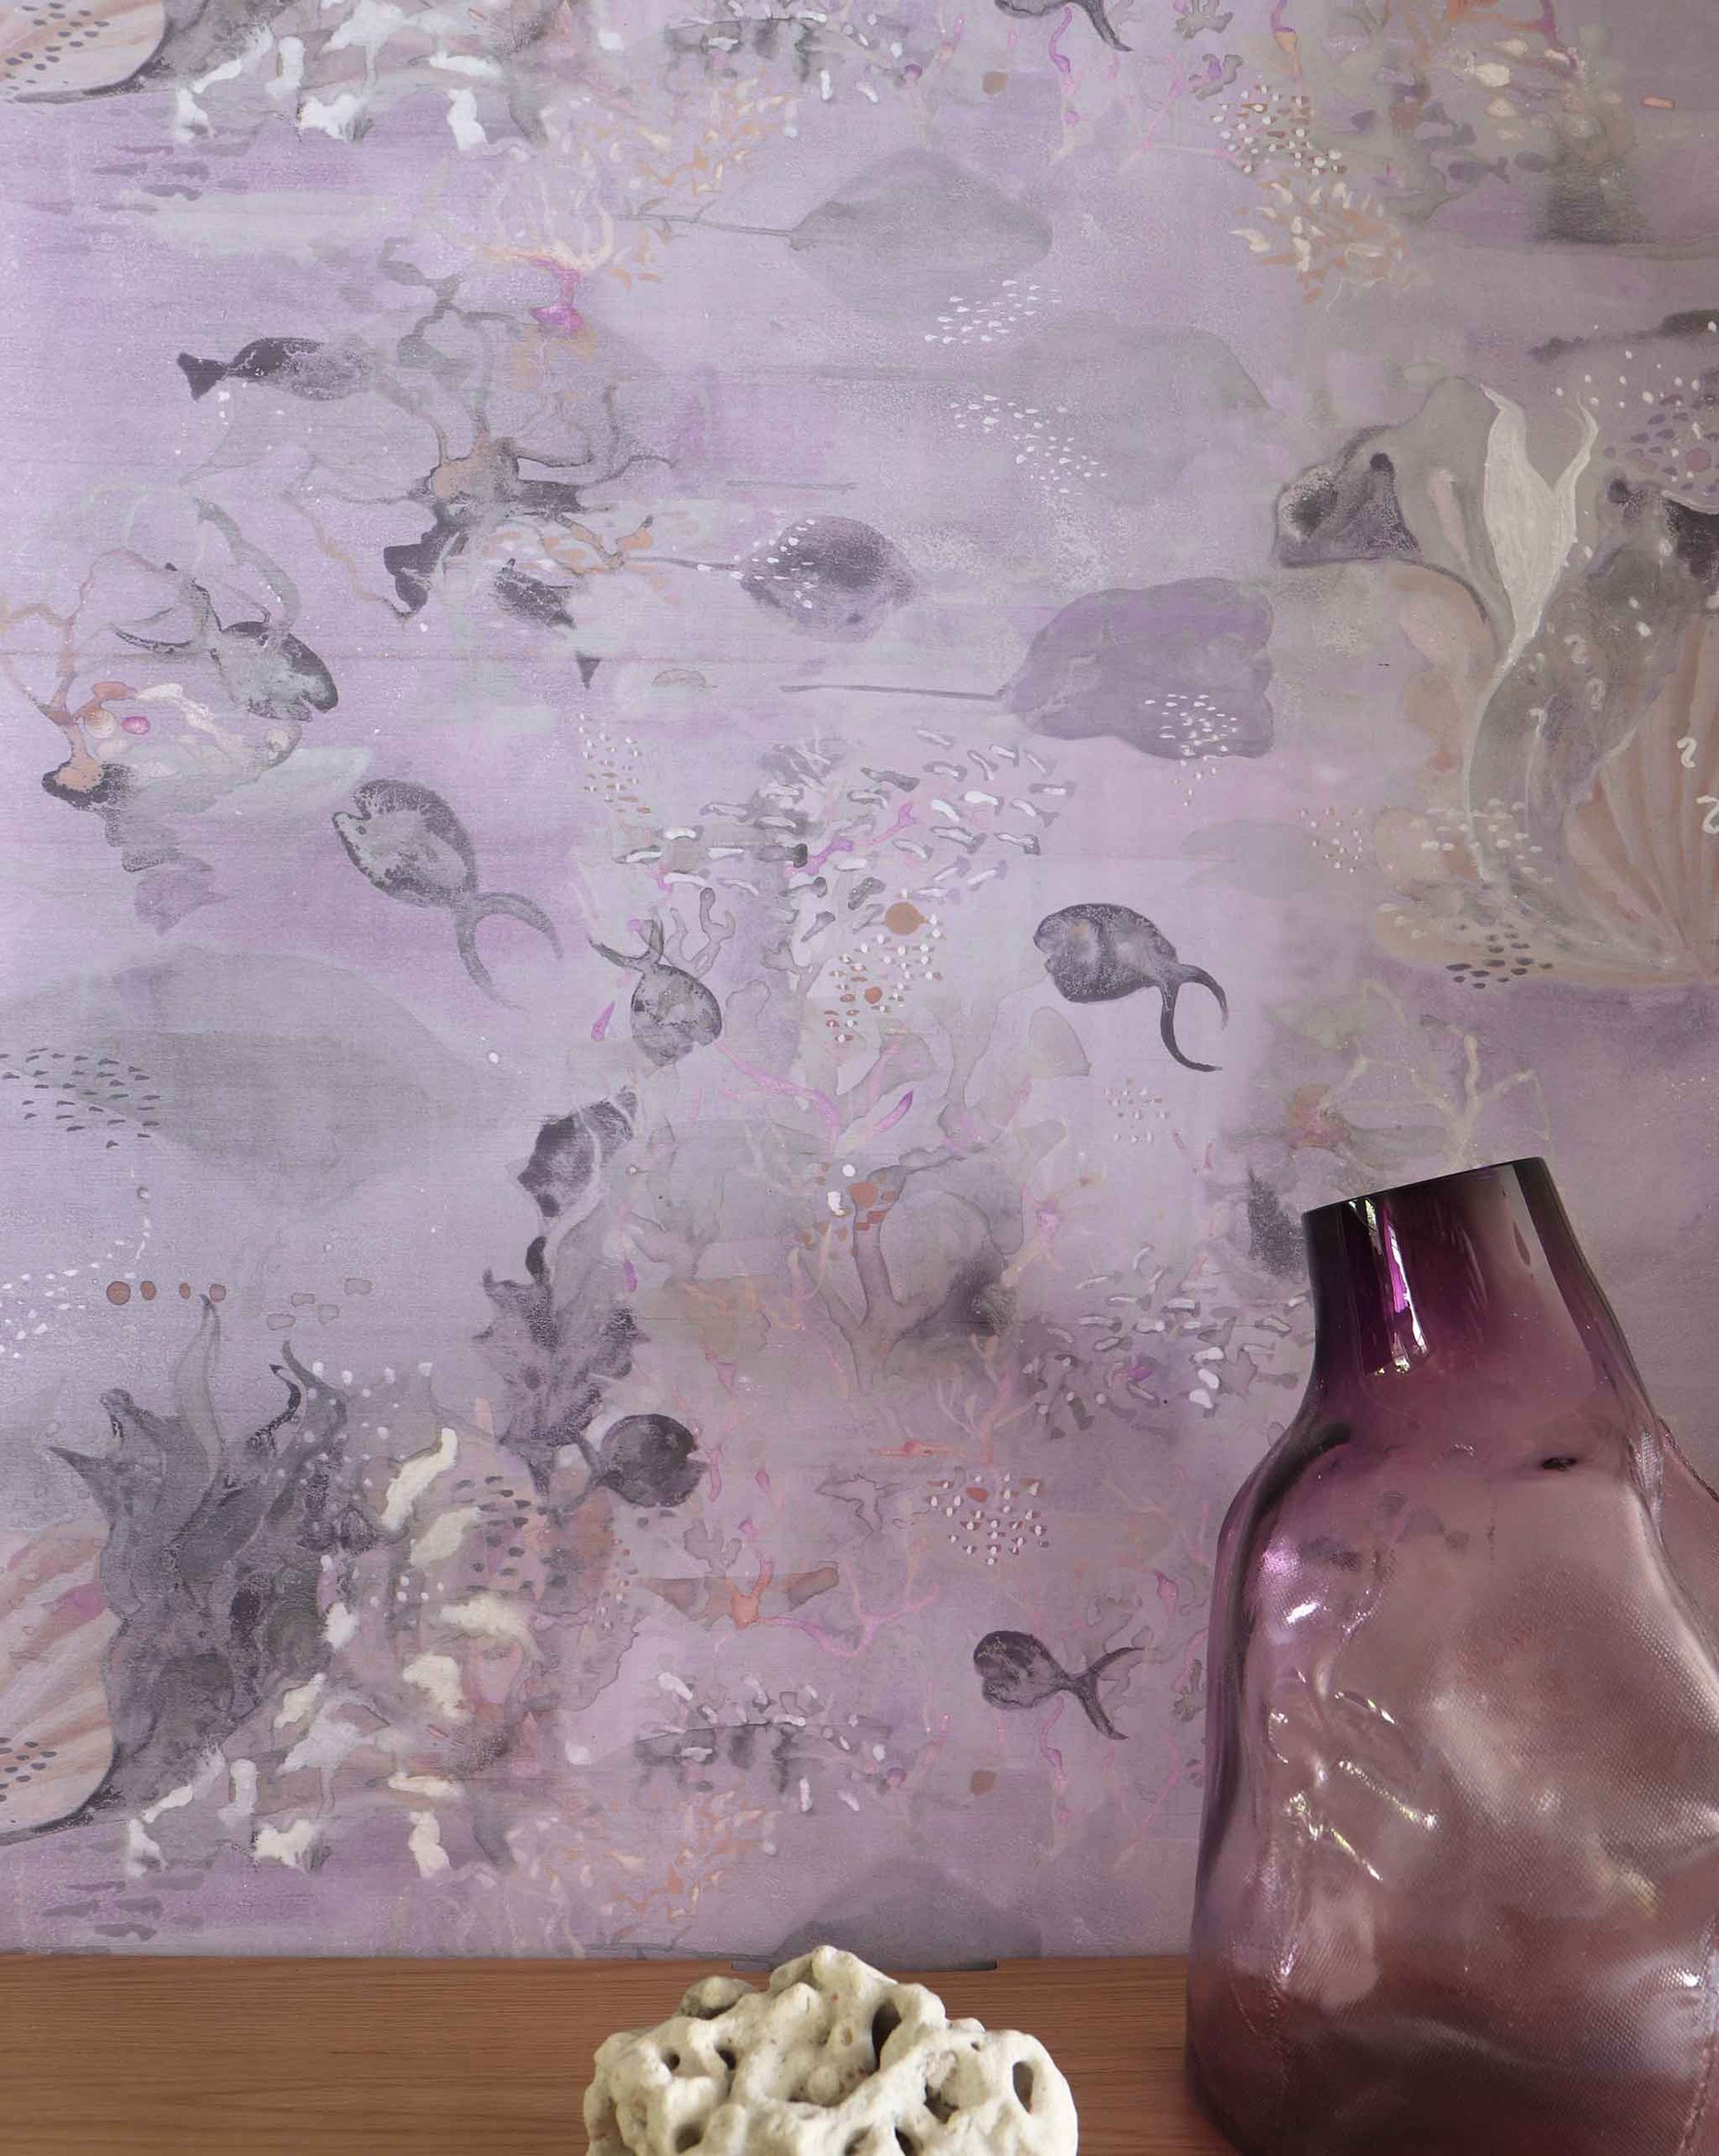 Eskayel’s Atoll wallpaper in Cay with its purple hues is printed on a paper backed silk and installed in a room.